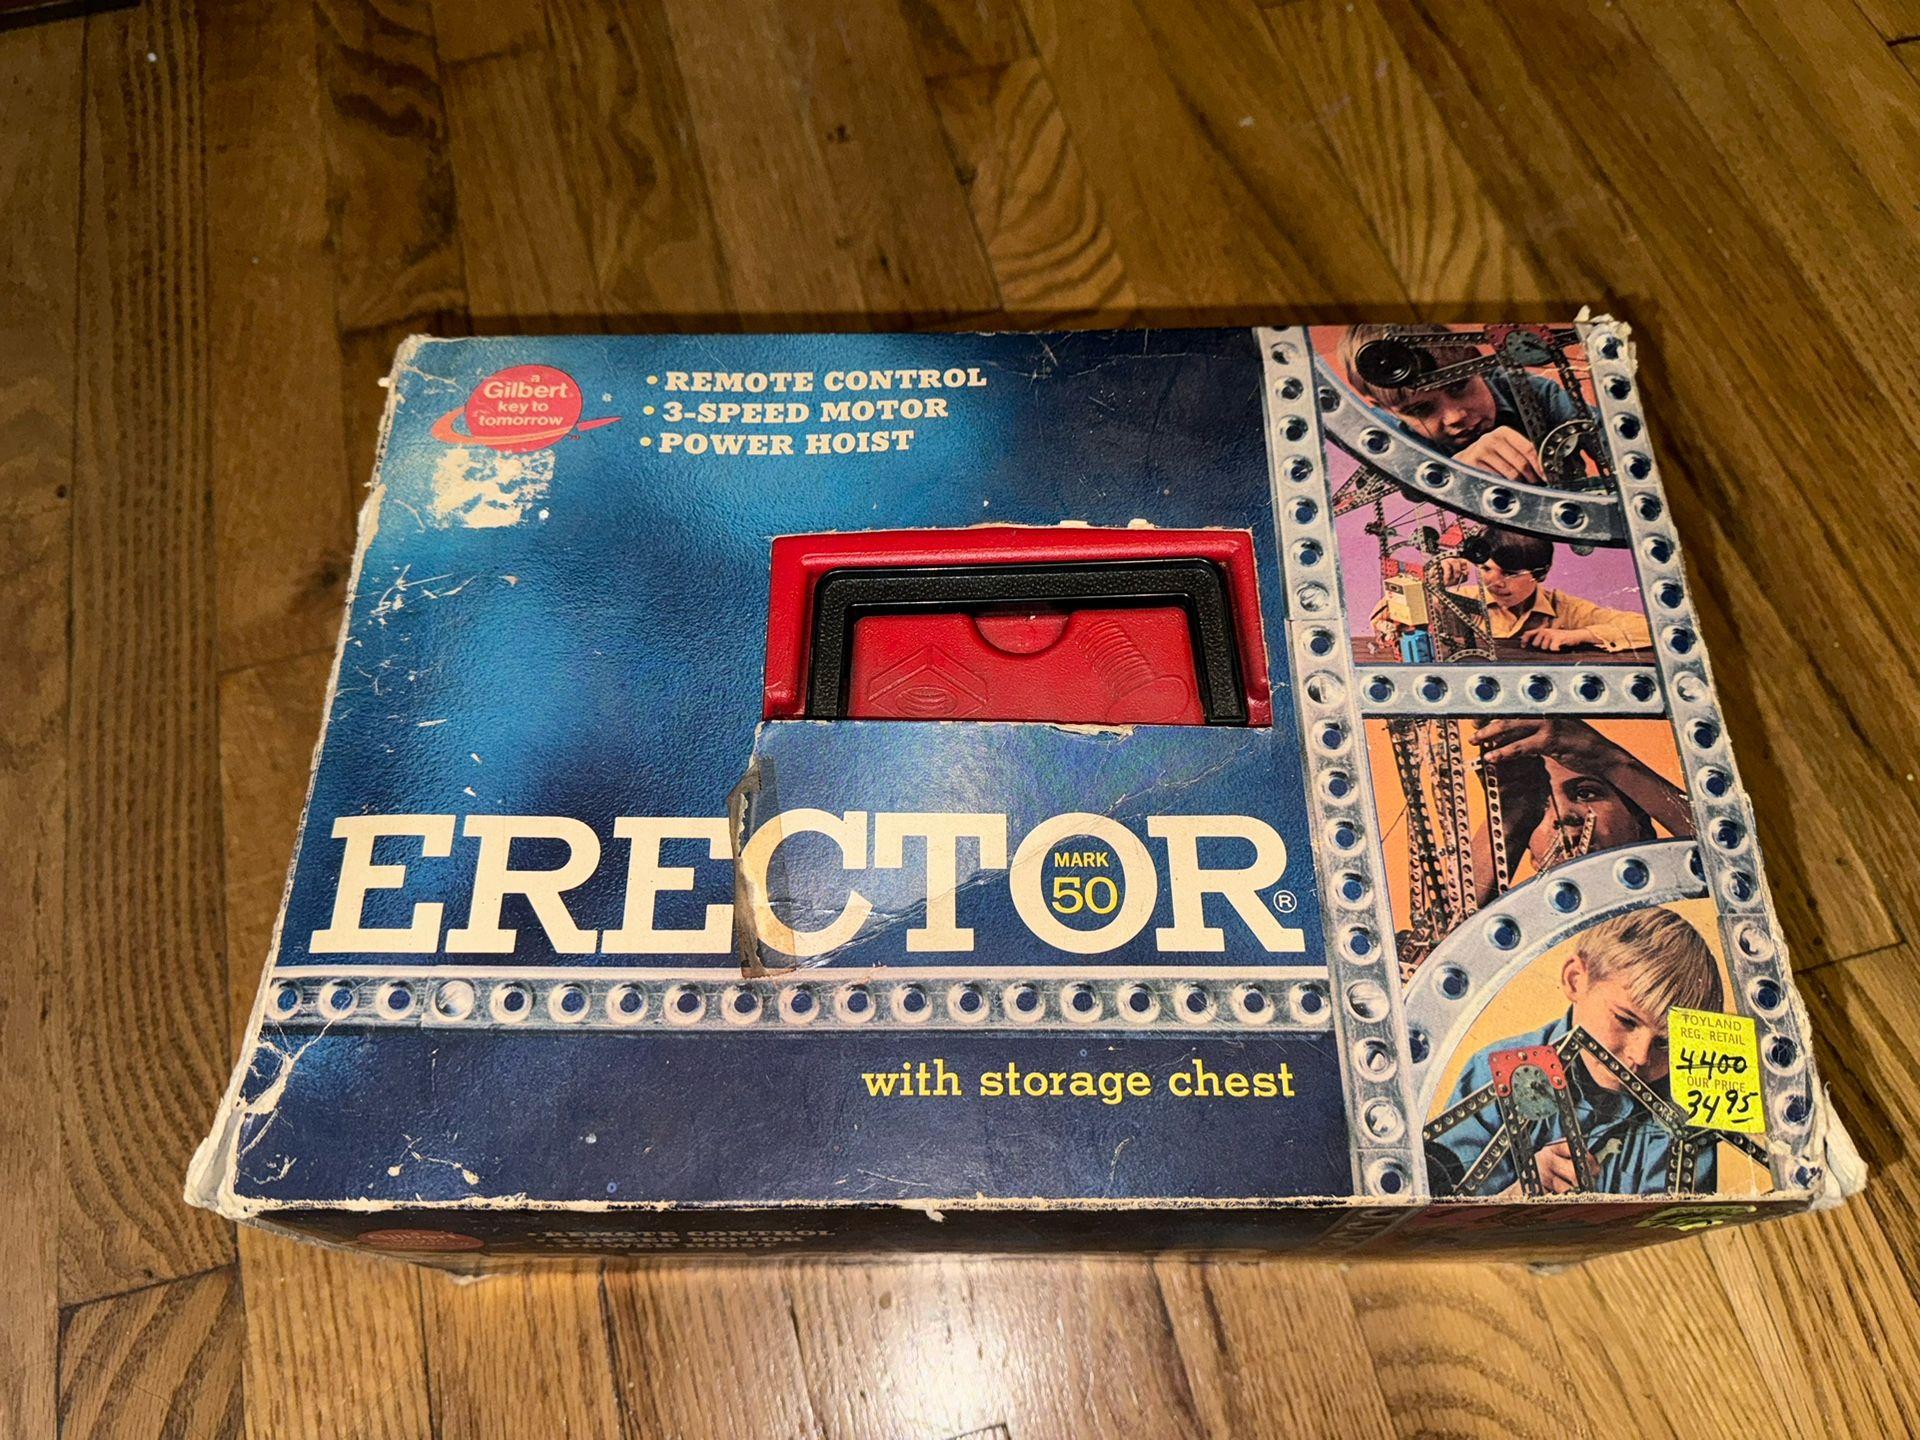 Vintage 1970s Gilbert erector set with red case and box